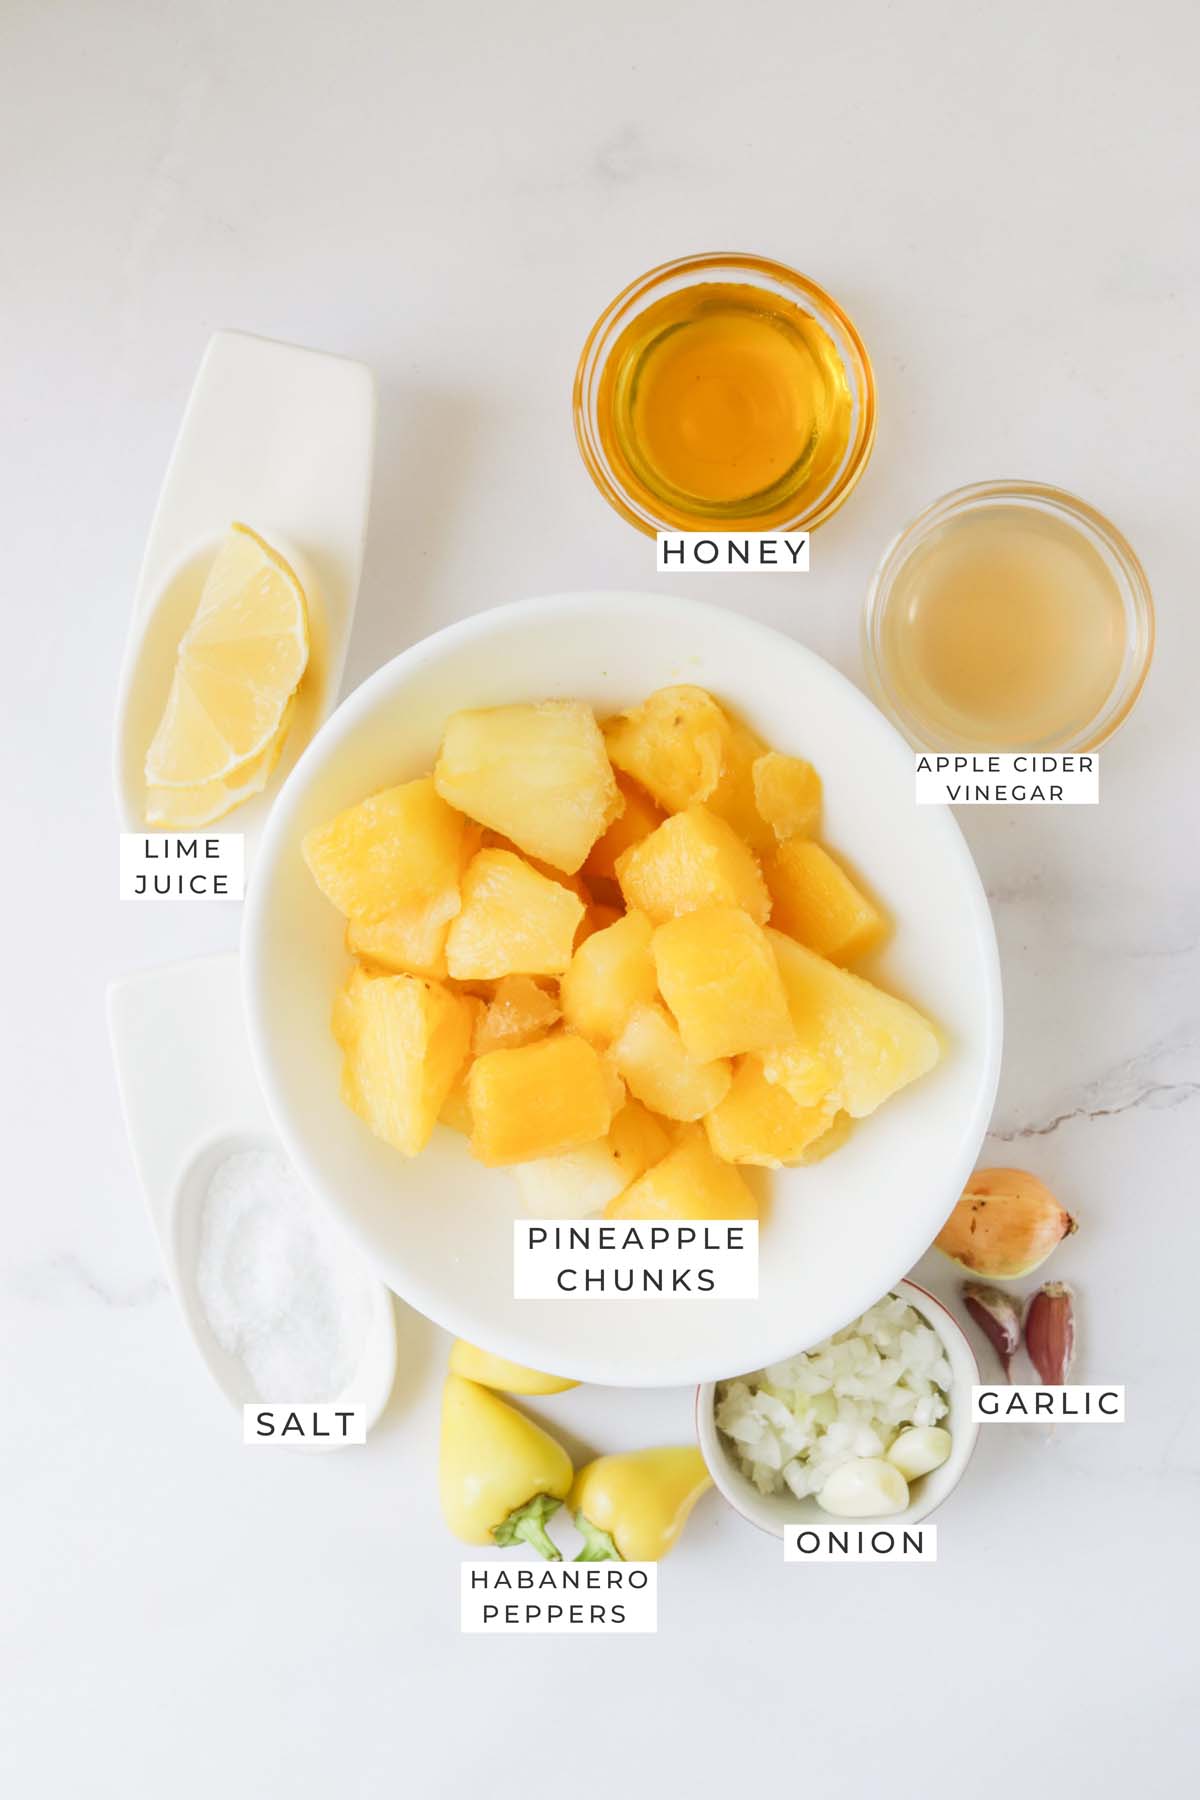 Labeled ingredients for the pineapple sauce.